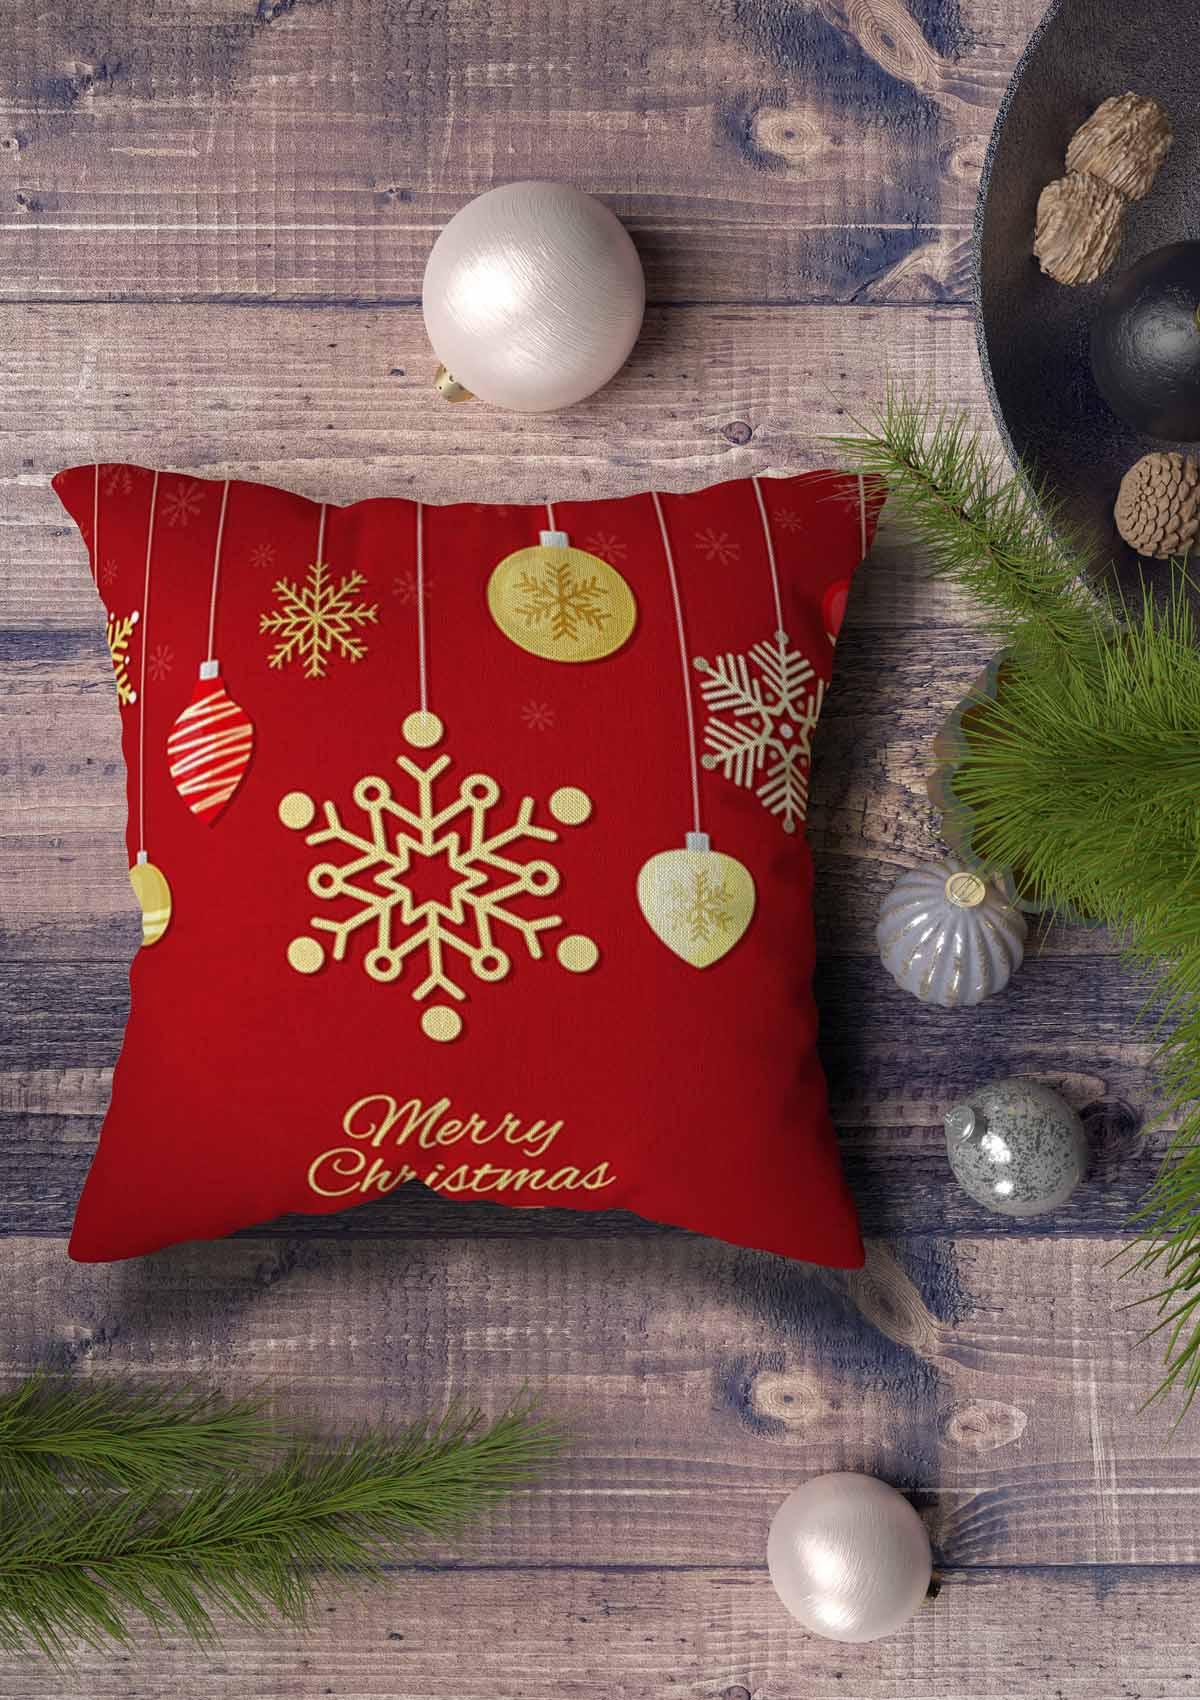 Red Christmas Cushion Covers - Festive cushion covers in vibrant red, ideal for adding holiday cheer to your home decor. Instantly brighten up your living spaces with these charming covers.